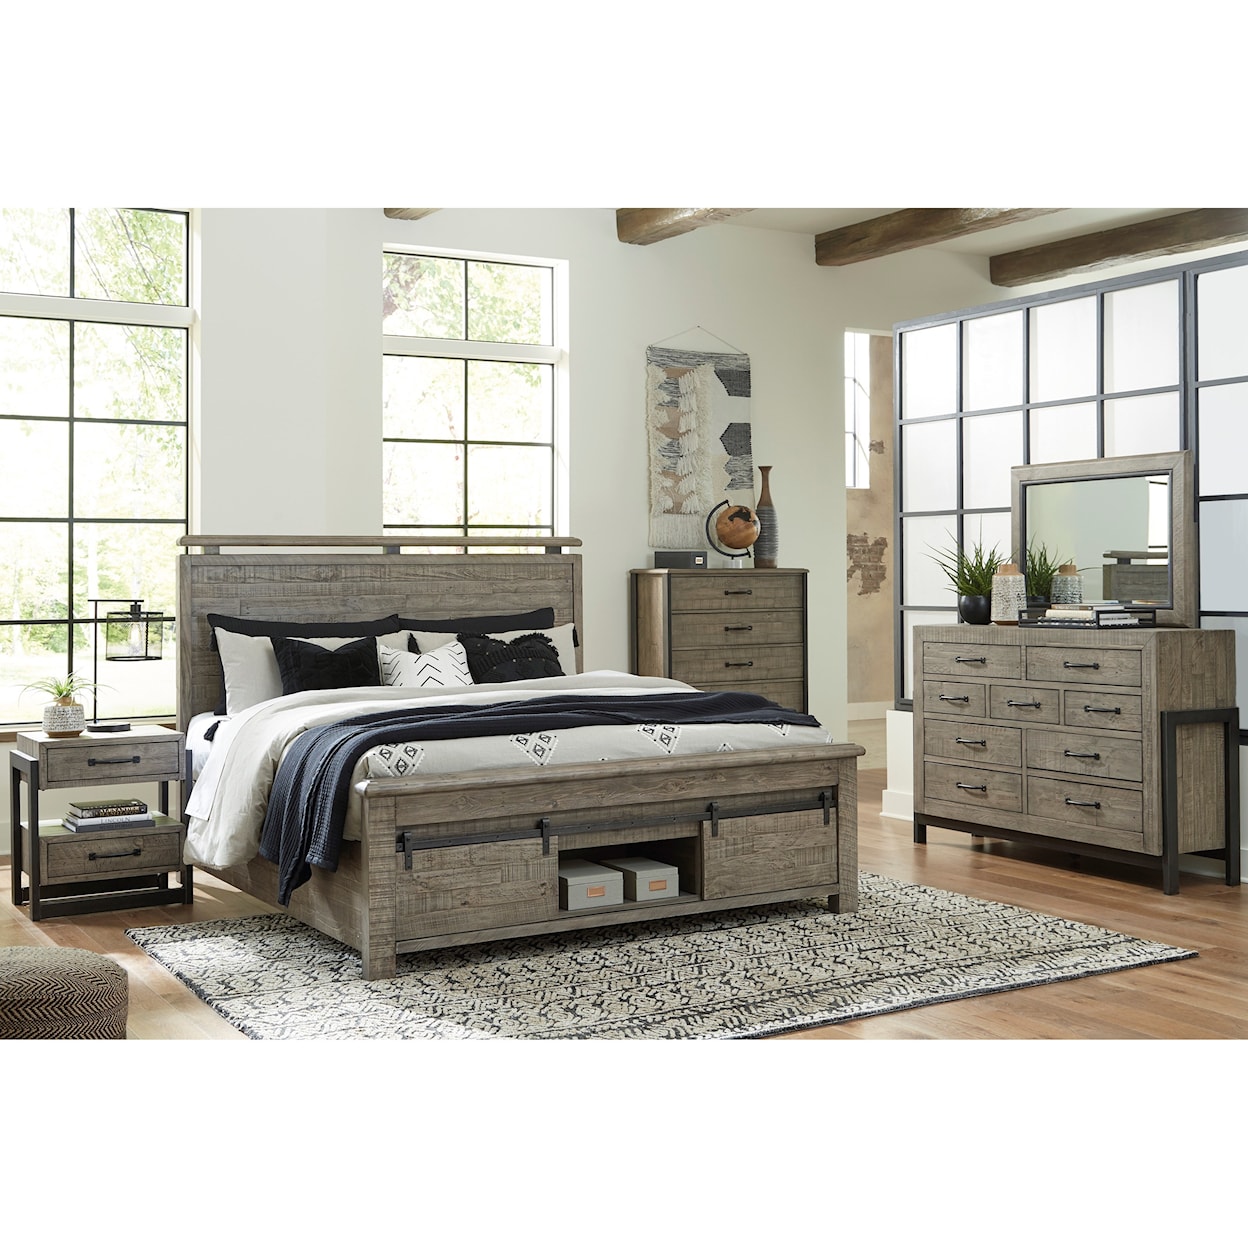 Signature Design by Ashley Brennagan Queen Panel Bed